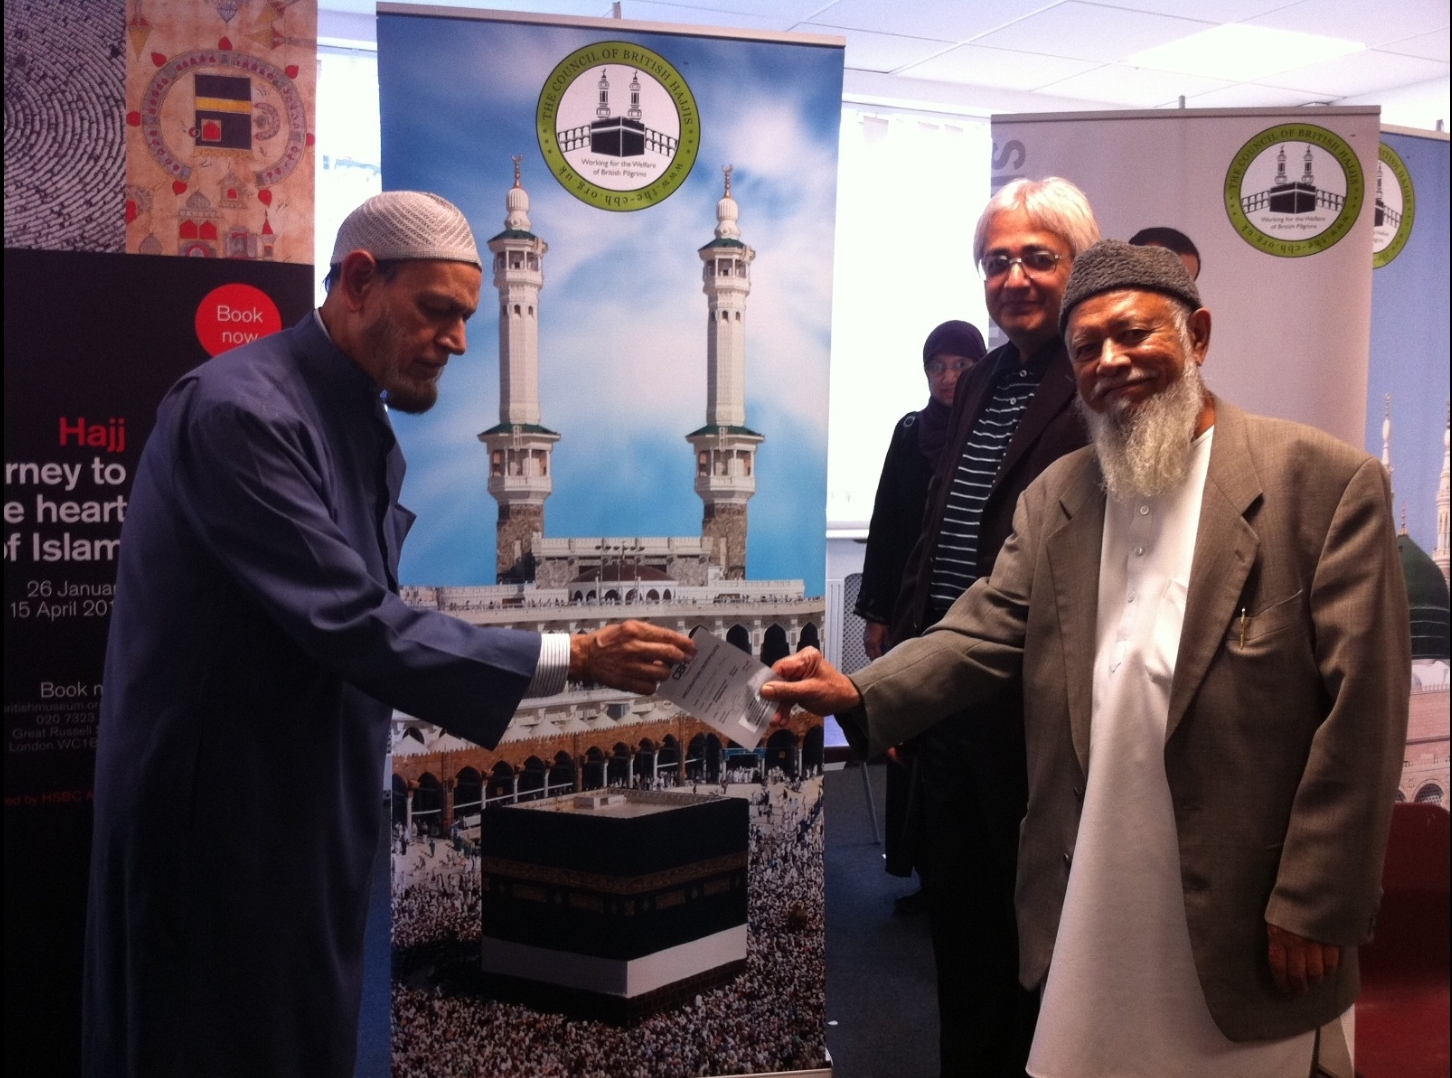 Dr Syed Mohiuddin (Left) presents Lord Adam Patel with his Meningitis ACWY Certificate of Immunisation at our 1st Hajj Vaccination Clinic at the London Muslim Centre (Sept 2012). 